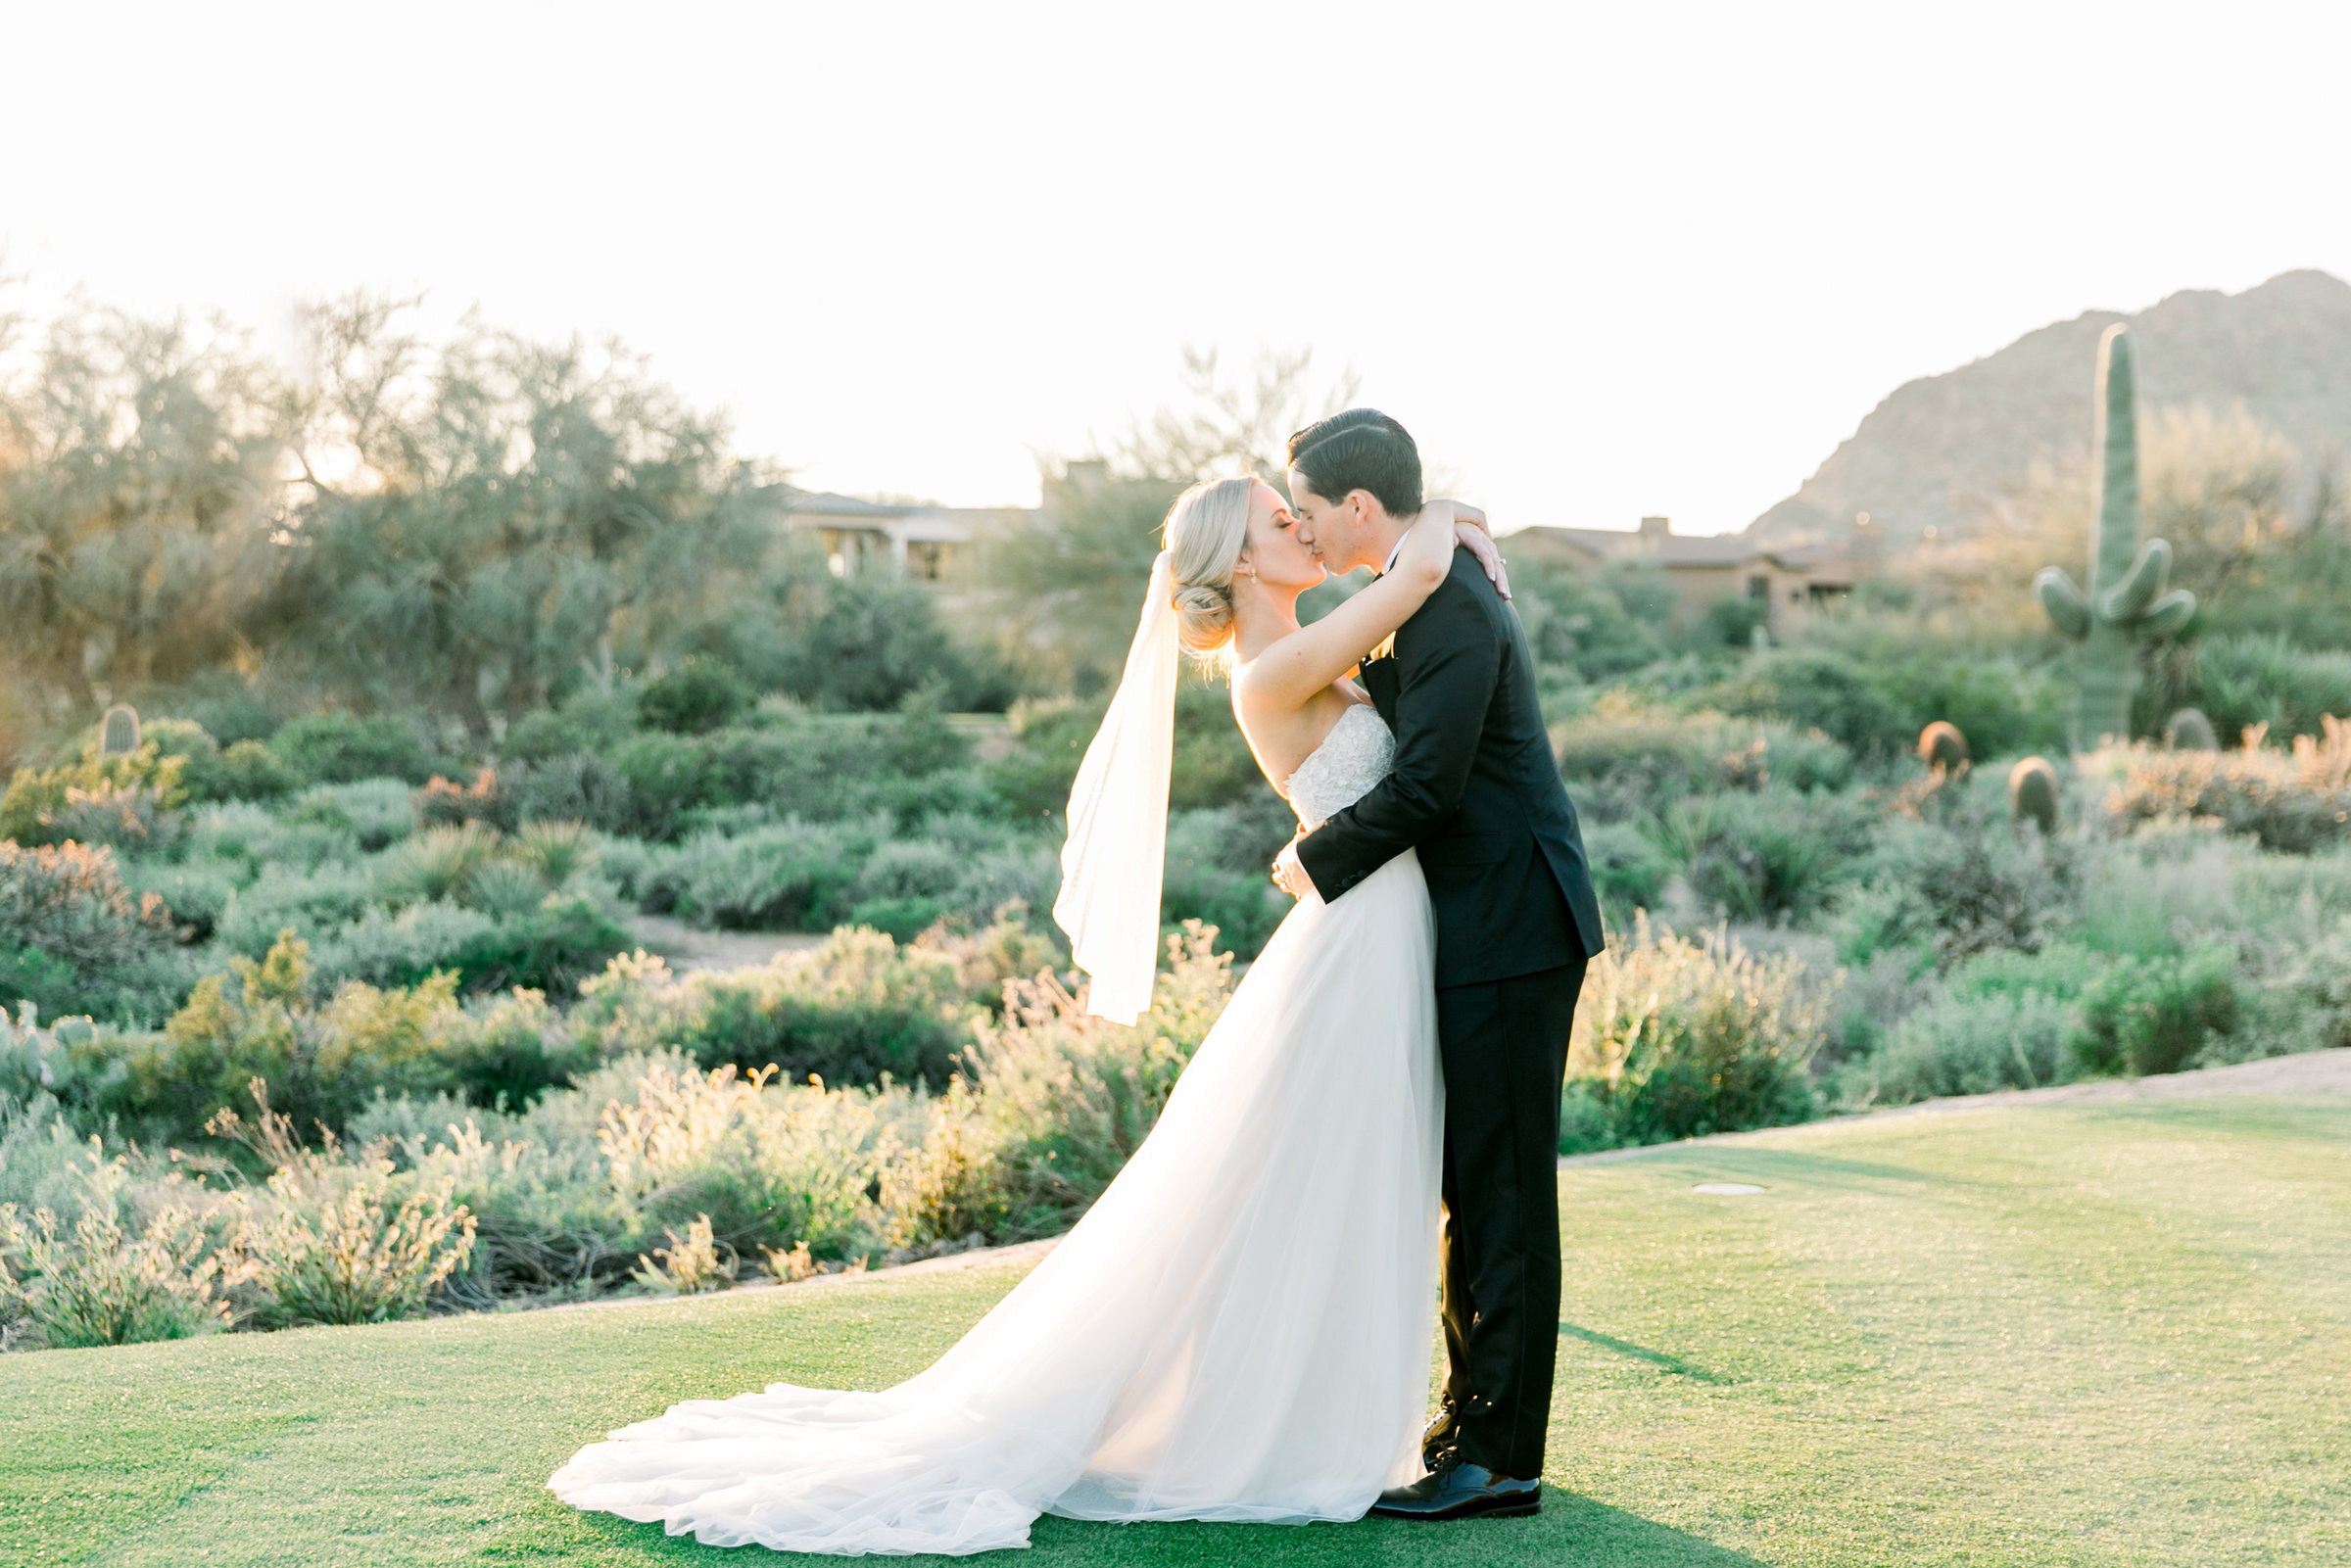 Karlie Colleen Photography - Arizona Wedding at The Troon Scottsdale Country Club - Paige & Shane -661